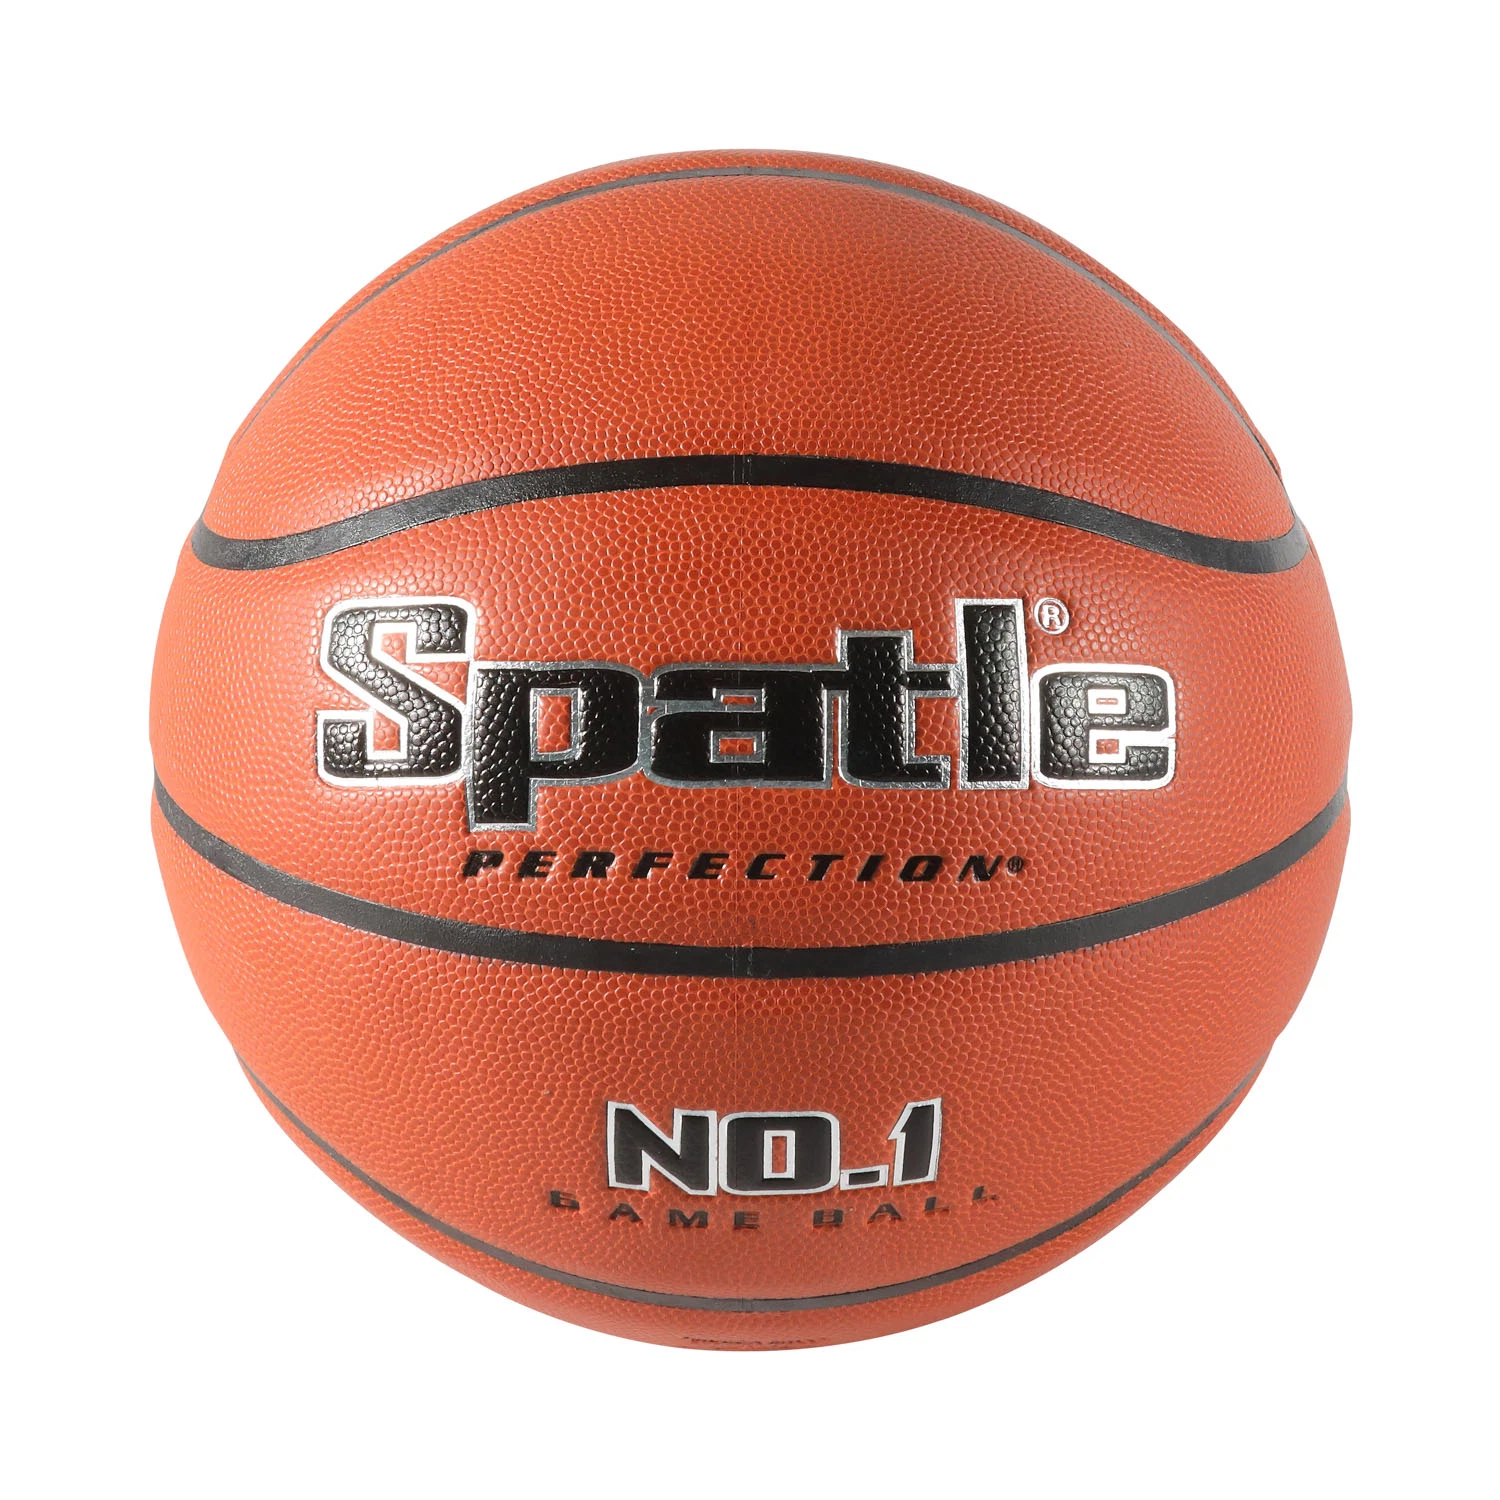 Personalized Microfiber Leather Training Basketball Game Ball